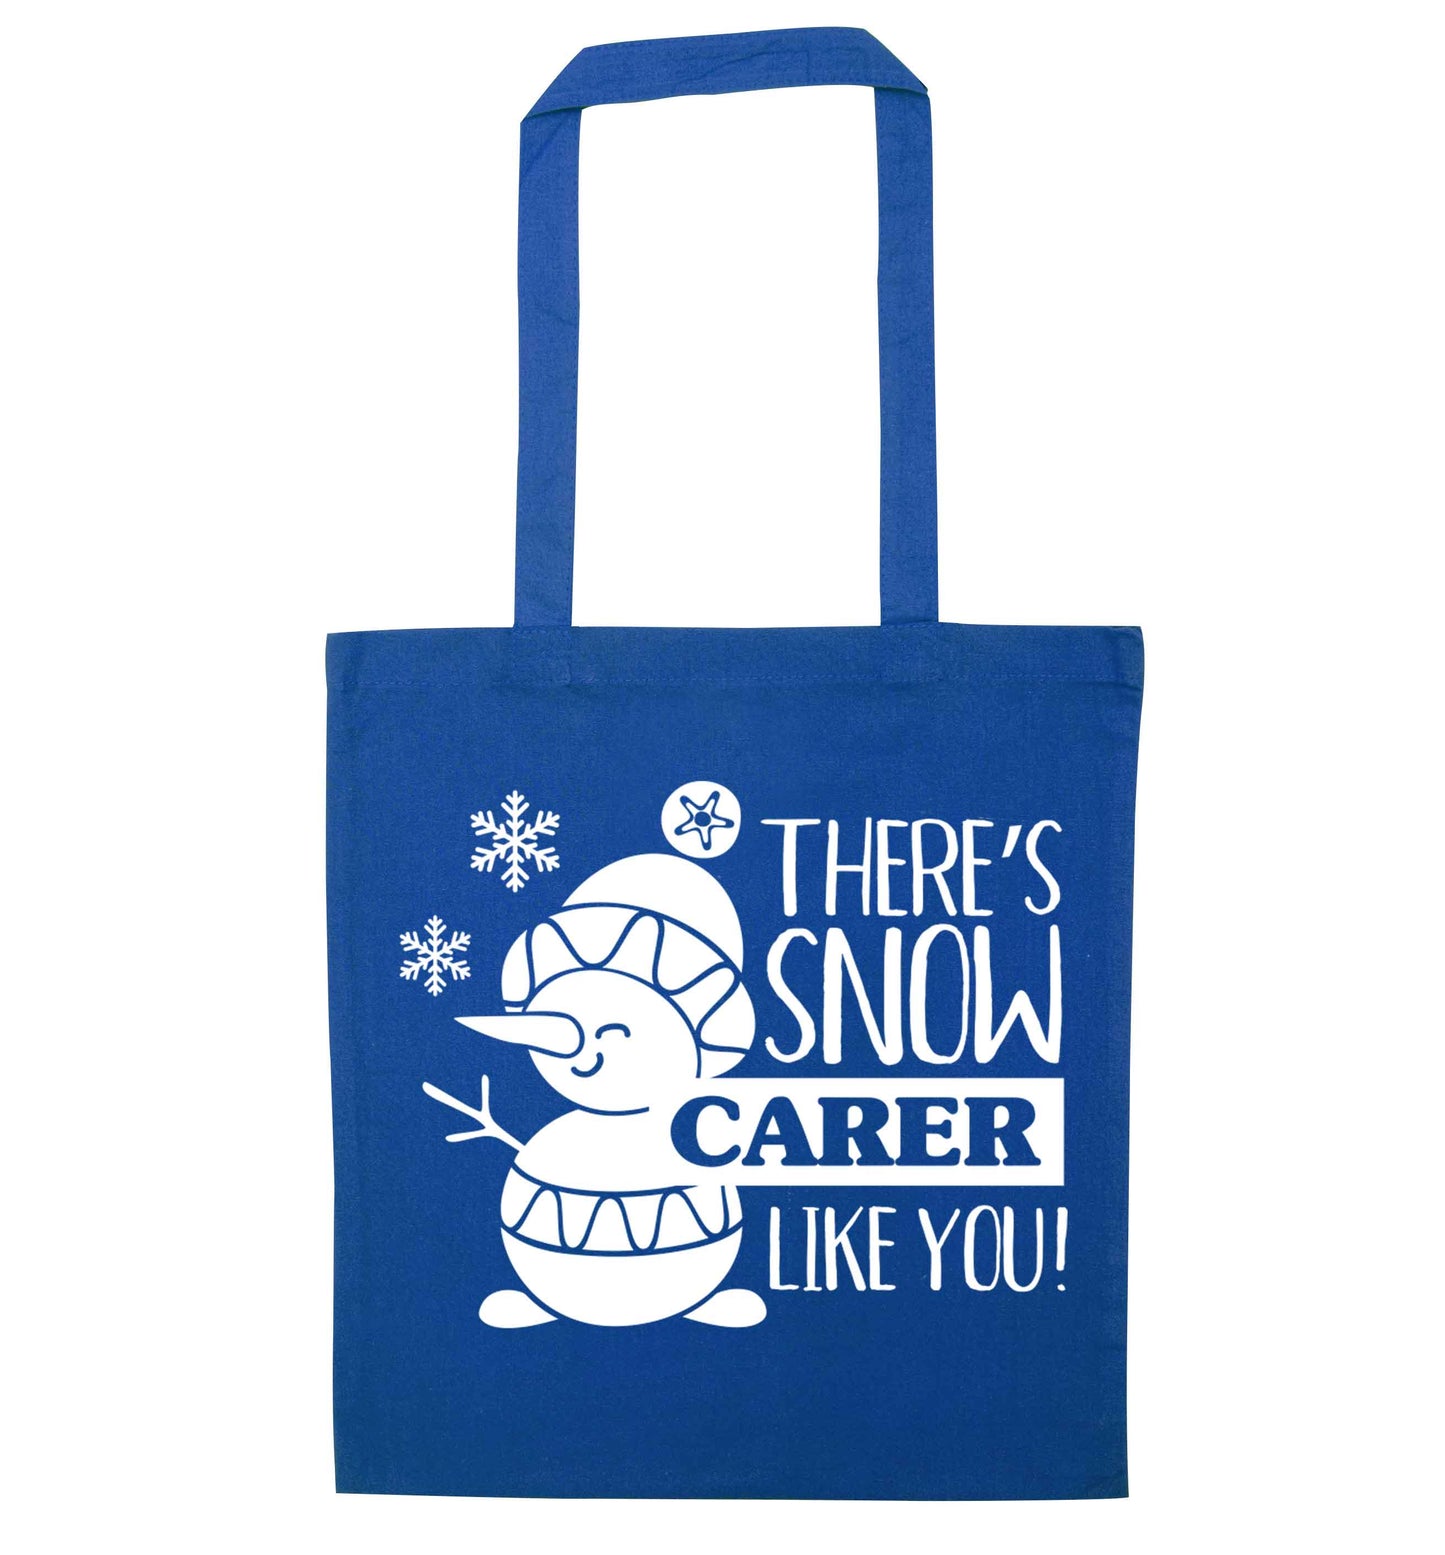 There's snow carer like you blue tote bag